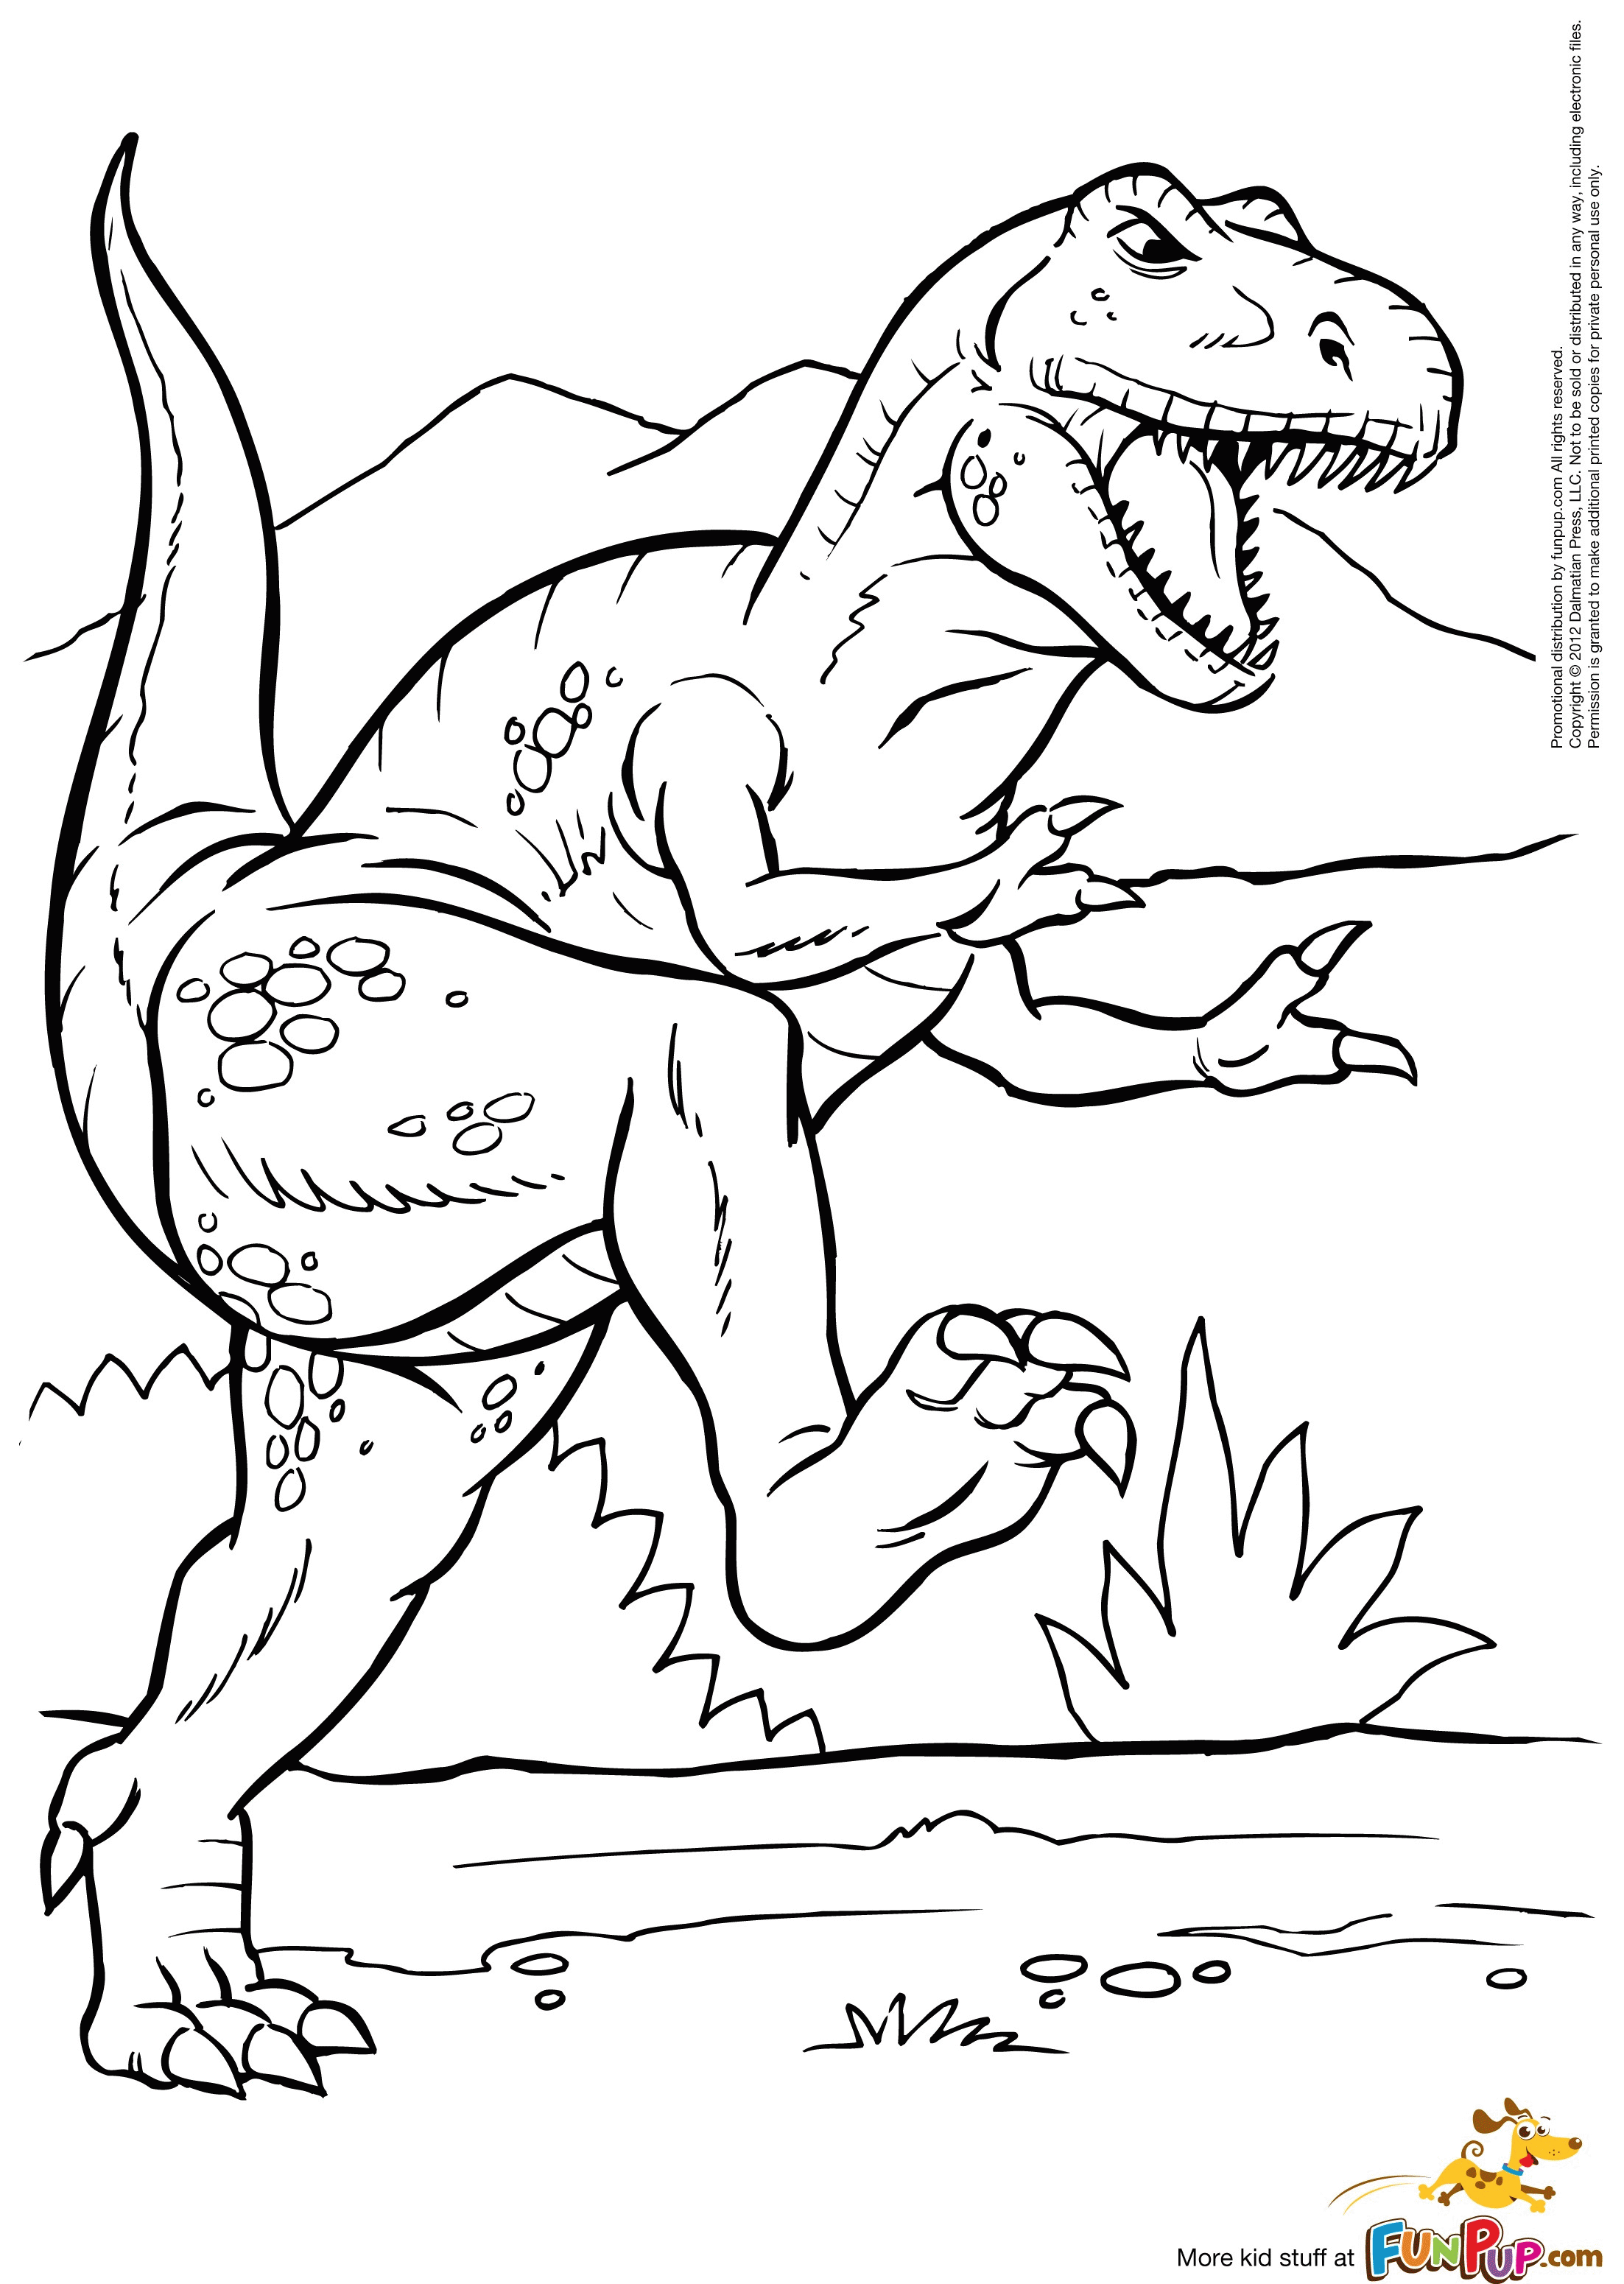 trex coloring pages - High Quality Coloring Pages